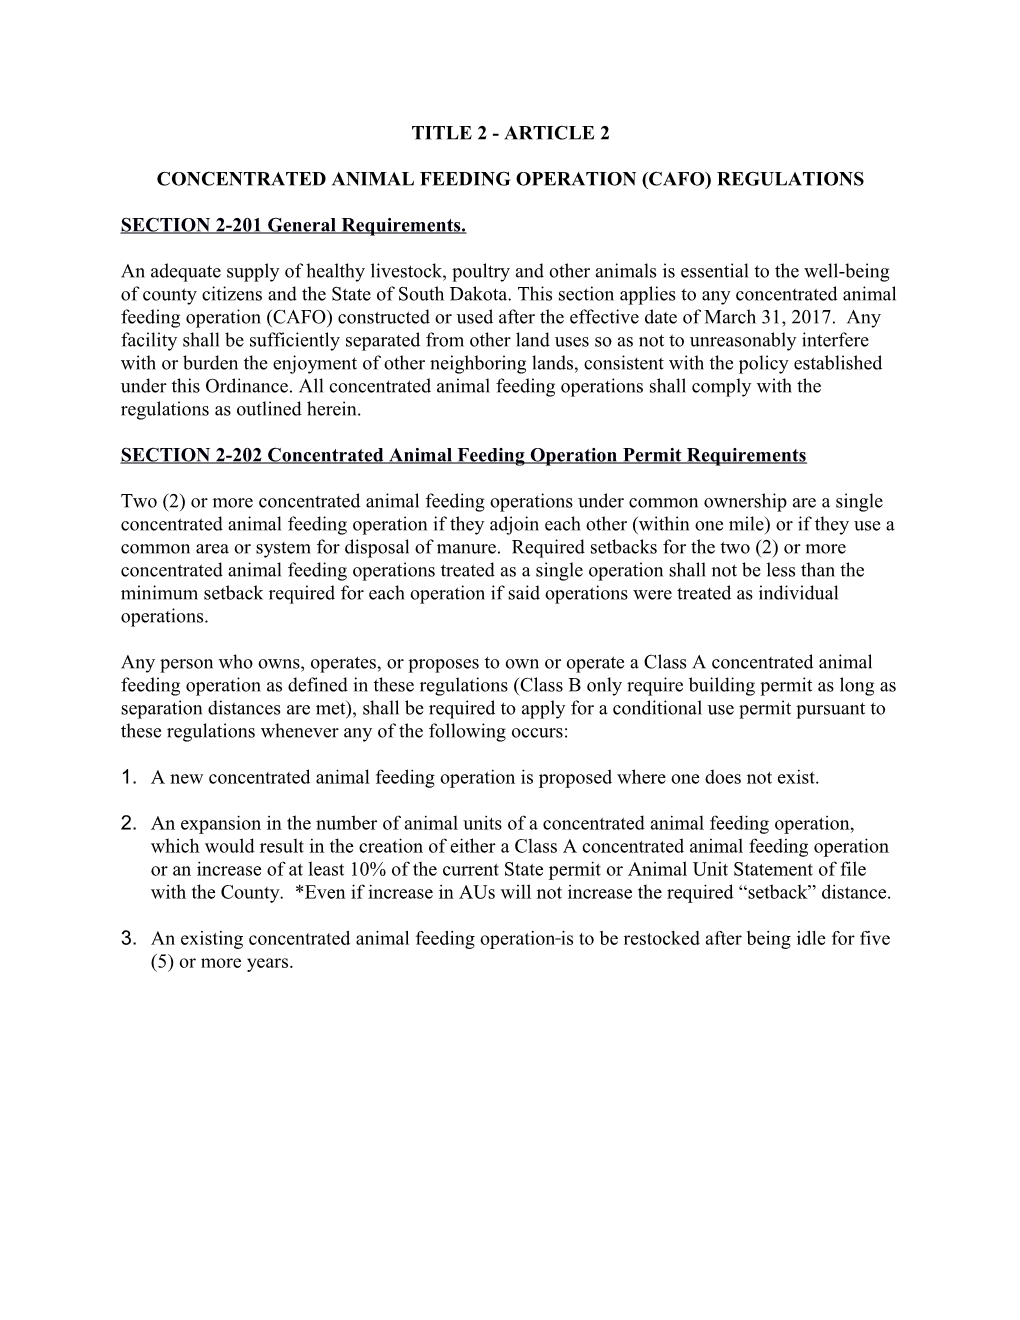 Concentrated Animal Feeding Operation (Cafo) Regulations